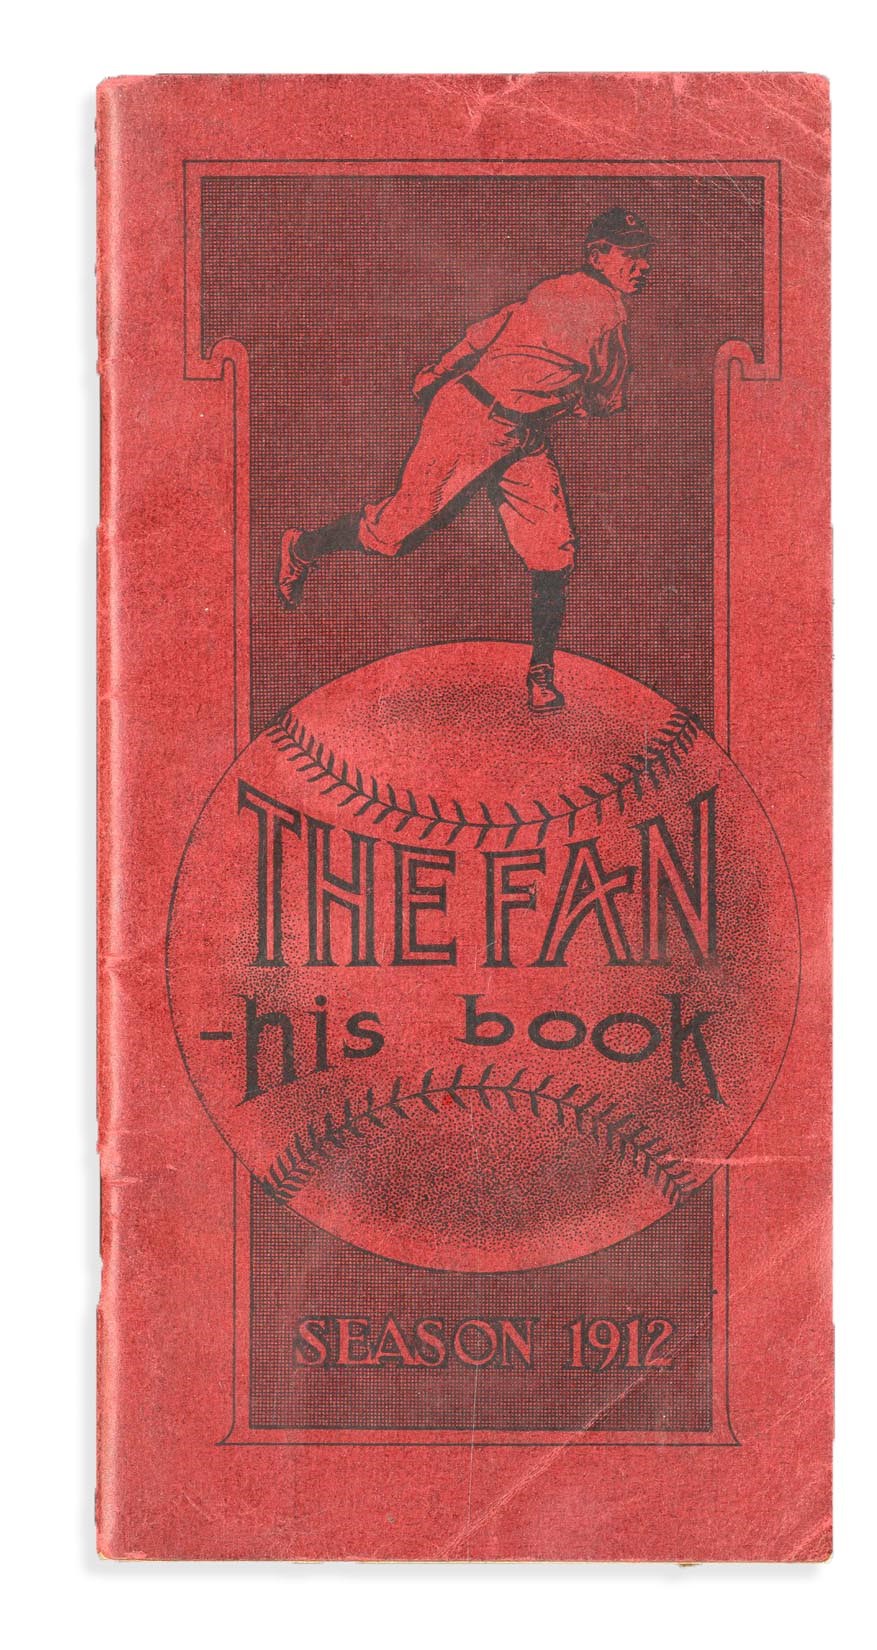 Tickets, Publications & Pins - 1912 Cleveland Indians "Yearbook" with Joe Jackson